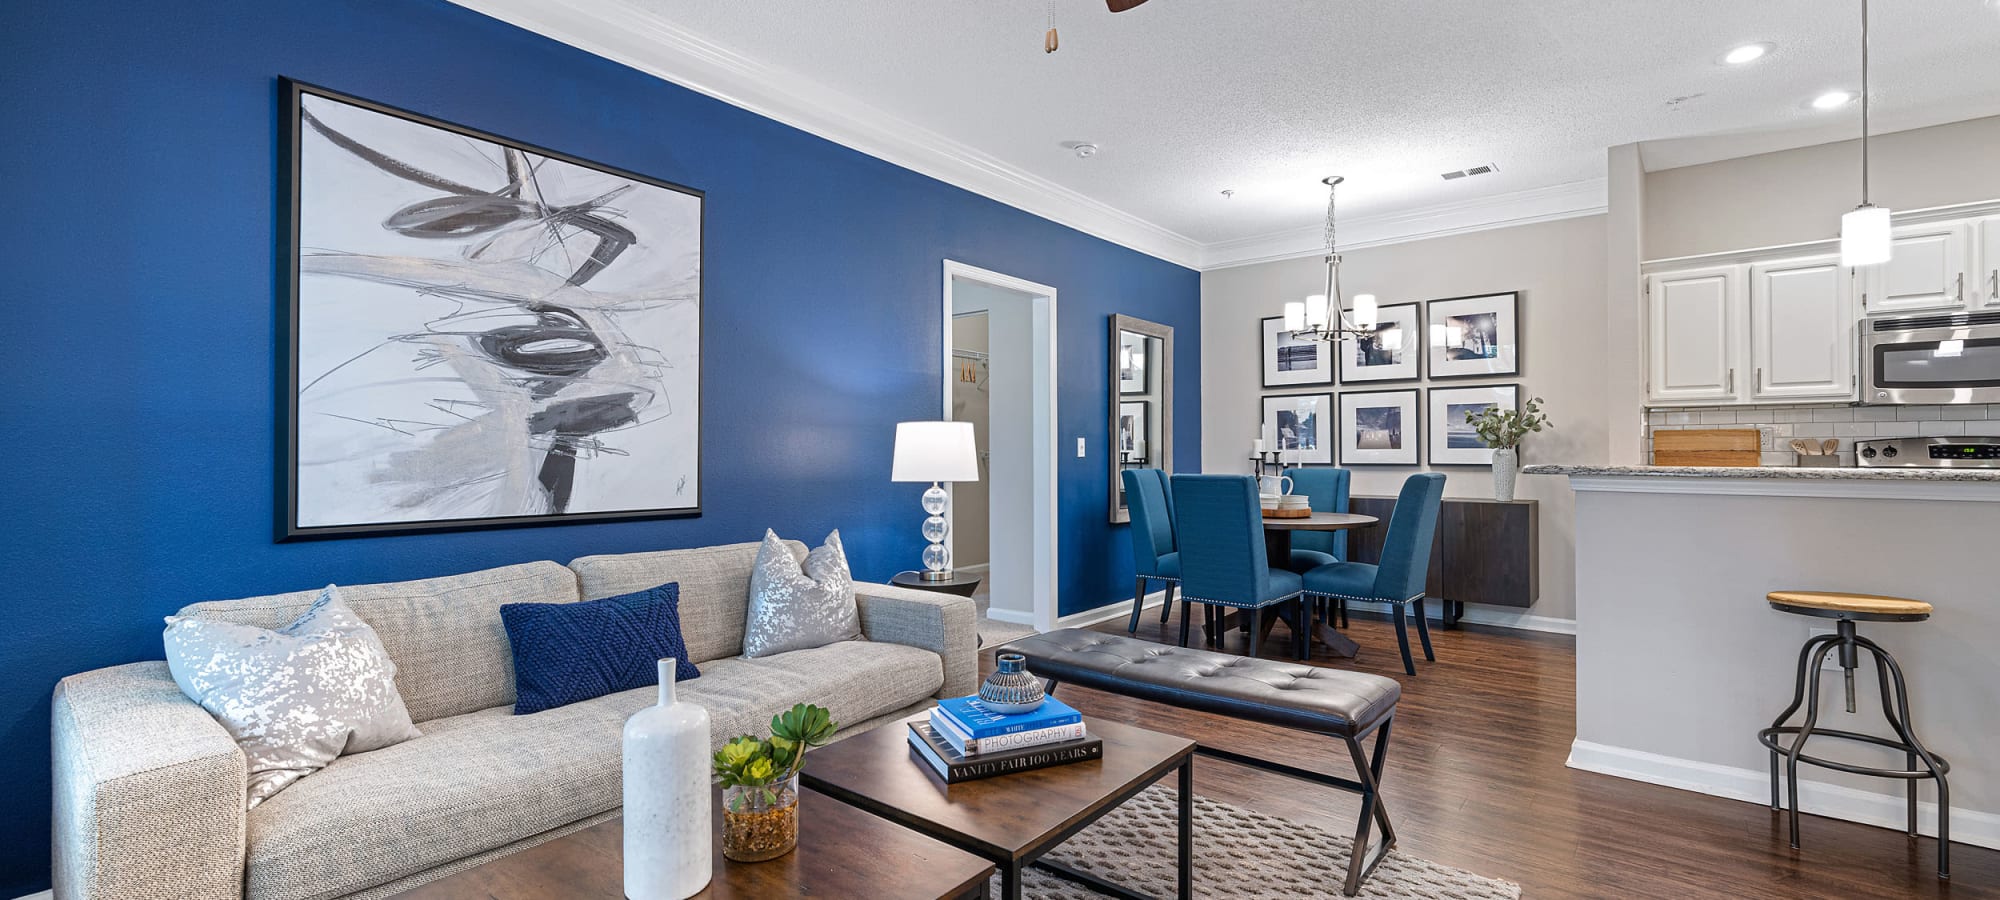 Floor plans at The Preserve at Ballantyne Commons in Charlotte, North Carolina